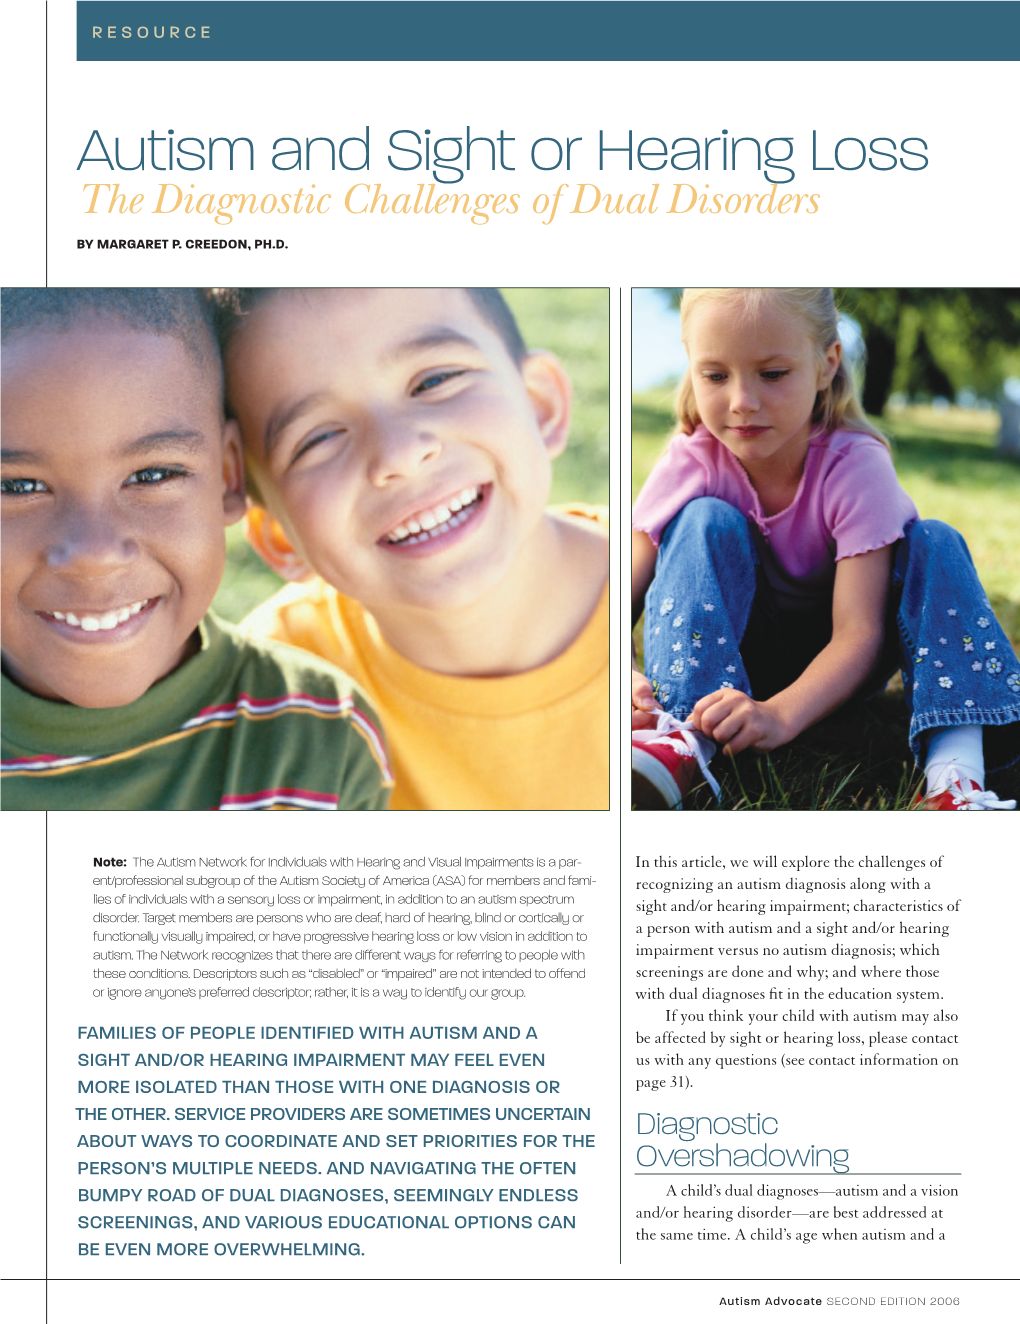 Autism and Sight Or Hearing Loss the Diagnostic Challenges of Dual Disorders by Margaret P